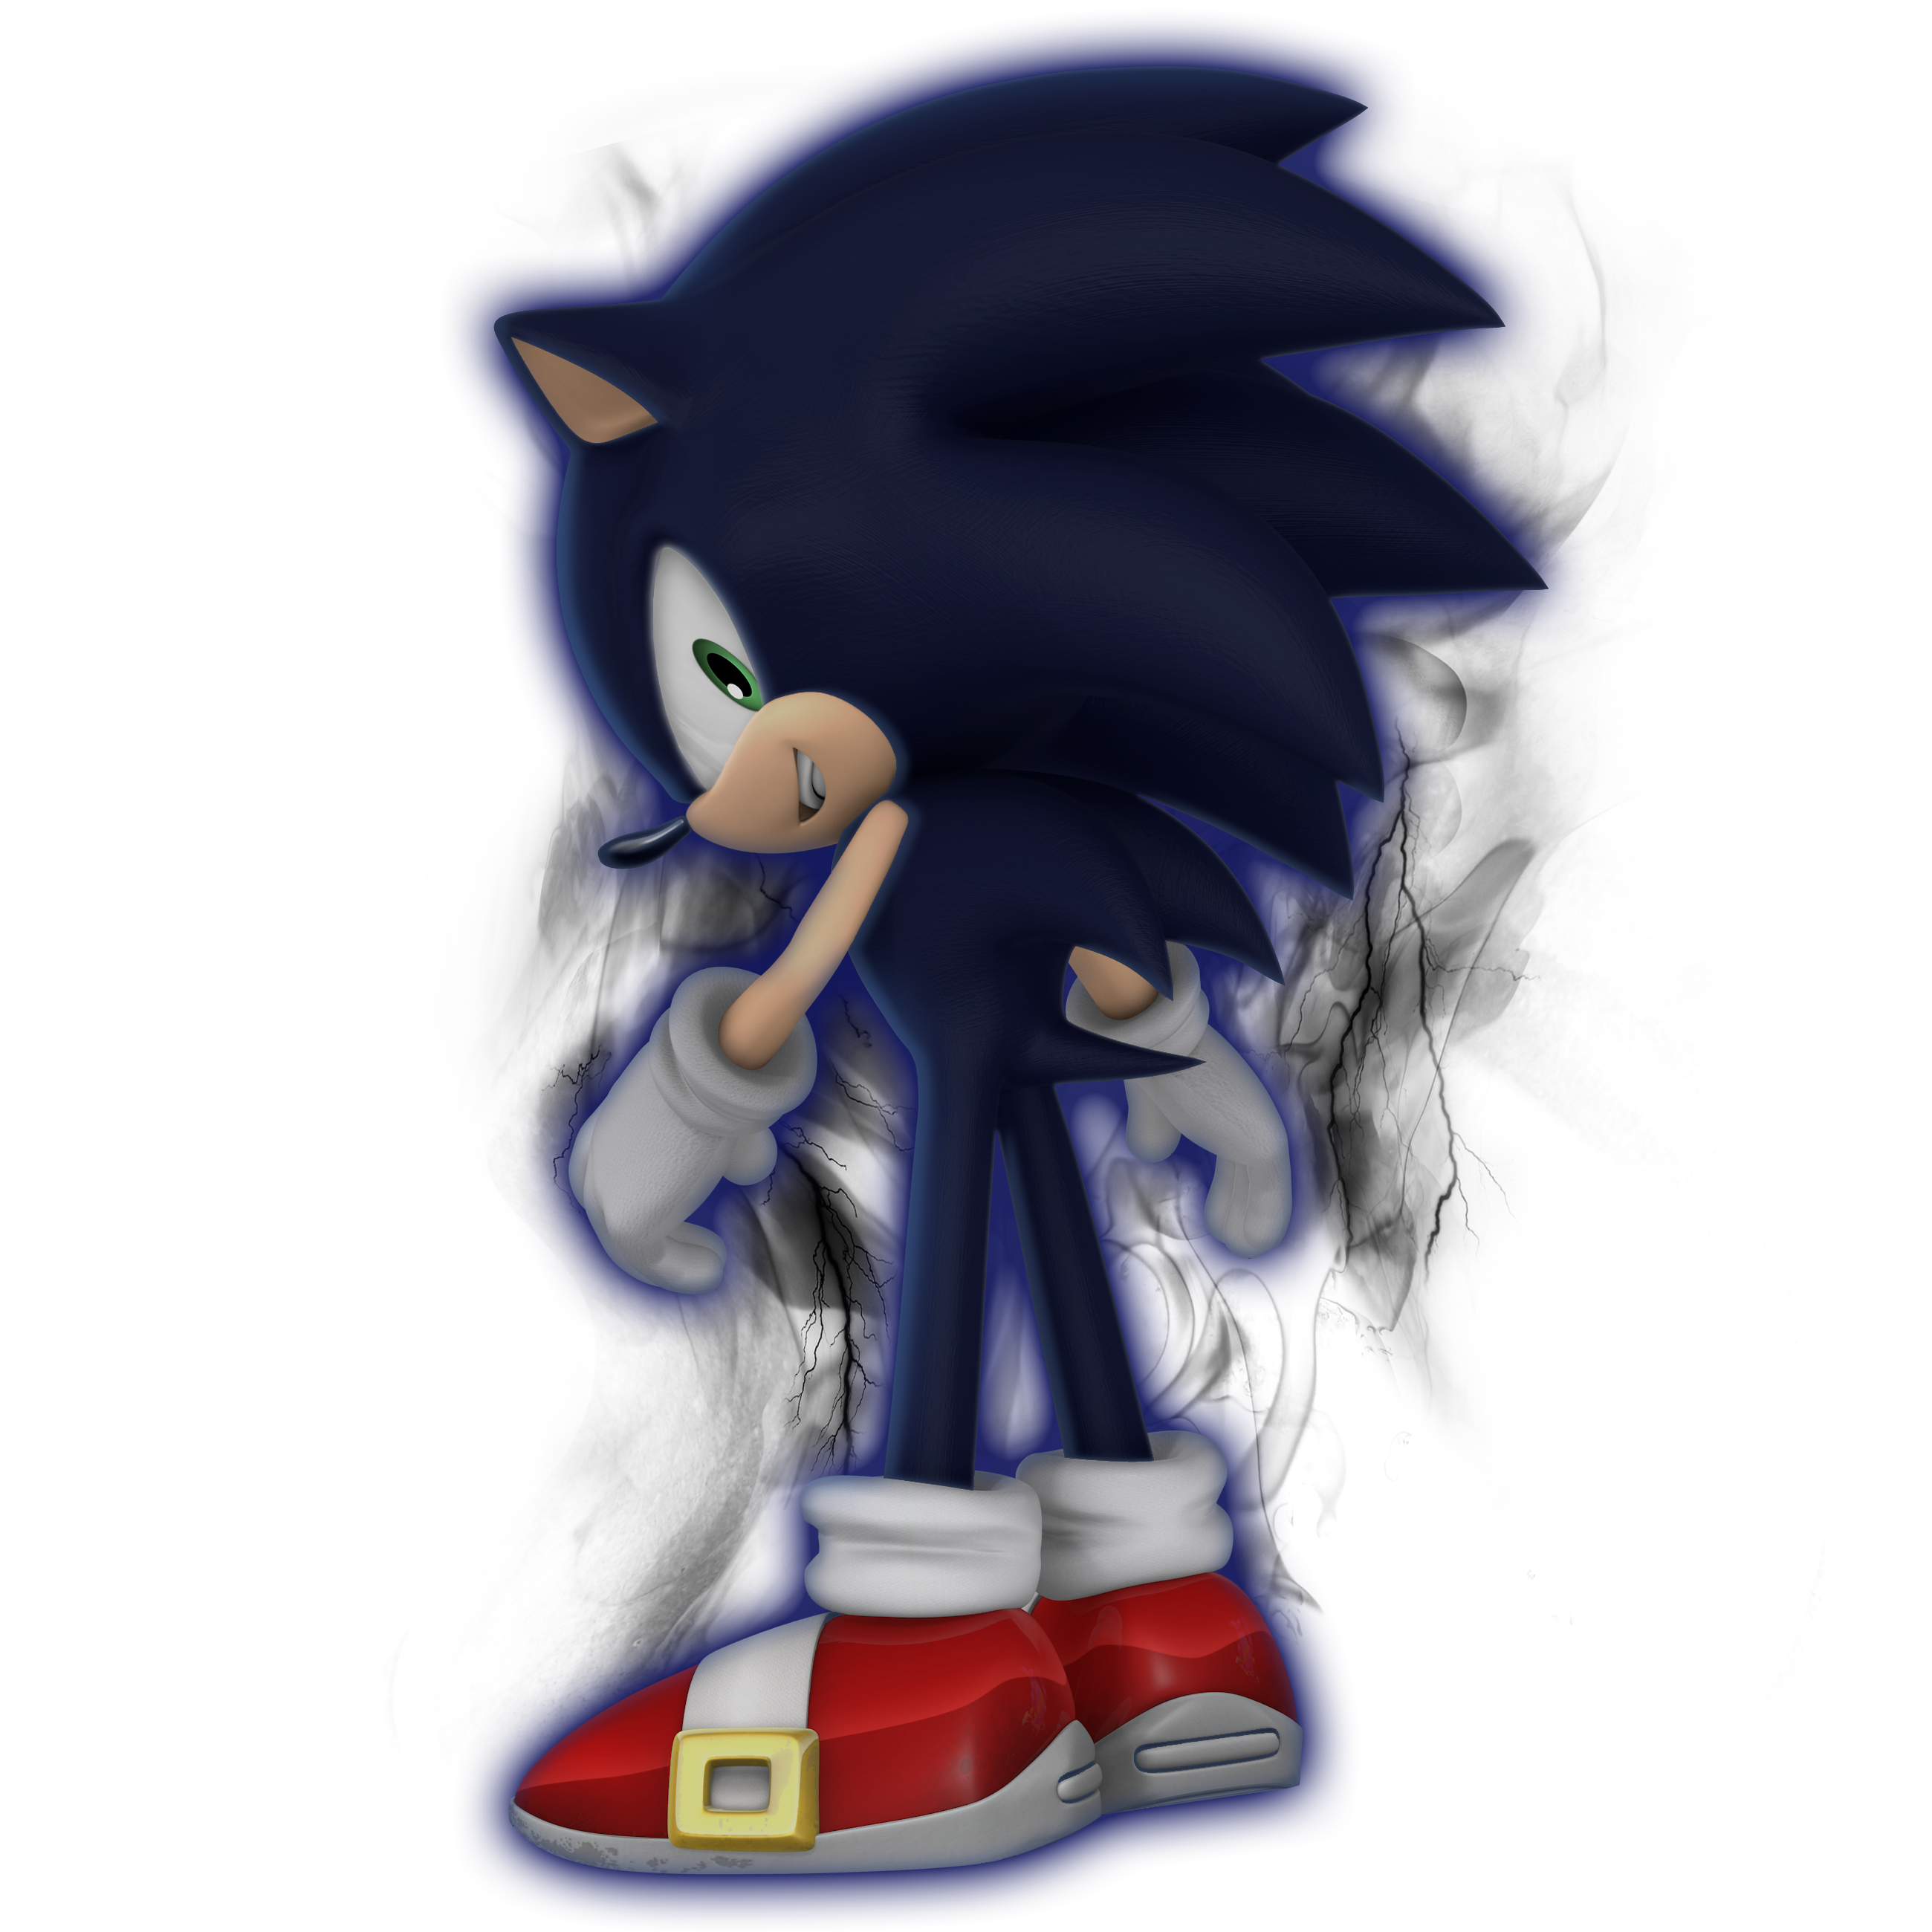 dark_sonic__mid_transformation__by_nibroc_rock-davs96d.png